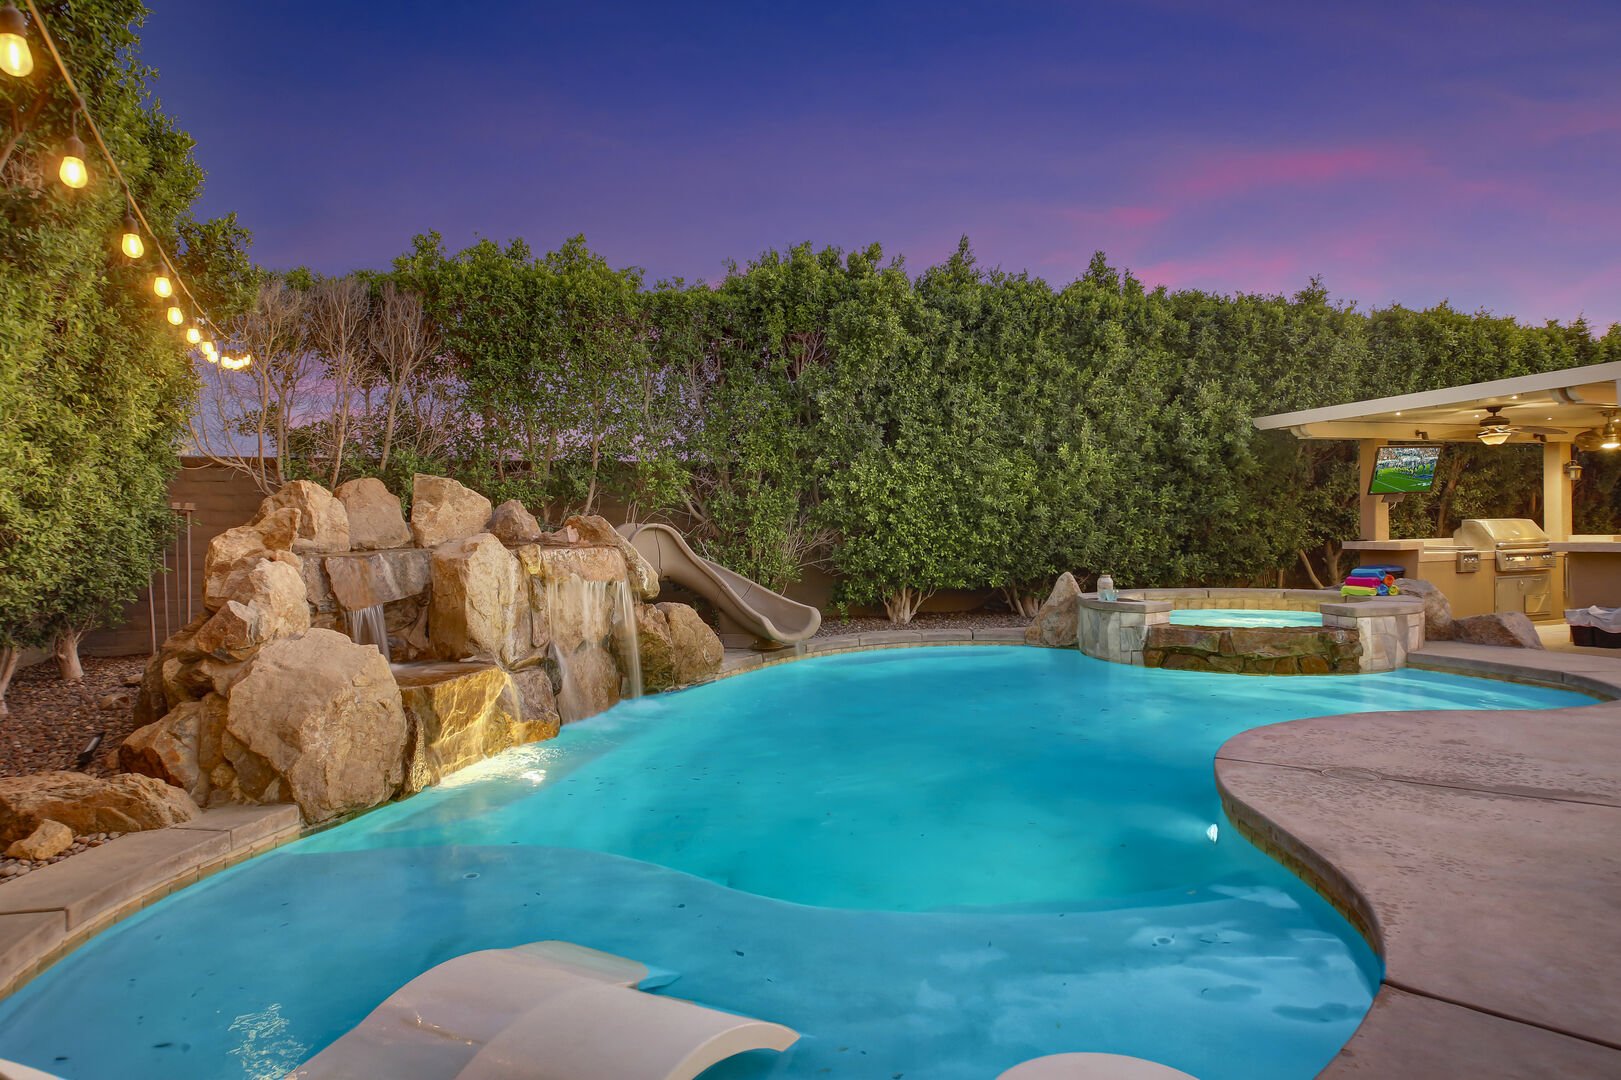 The large pool features an amazing waterfall feature!